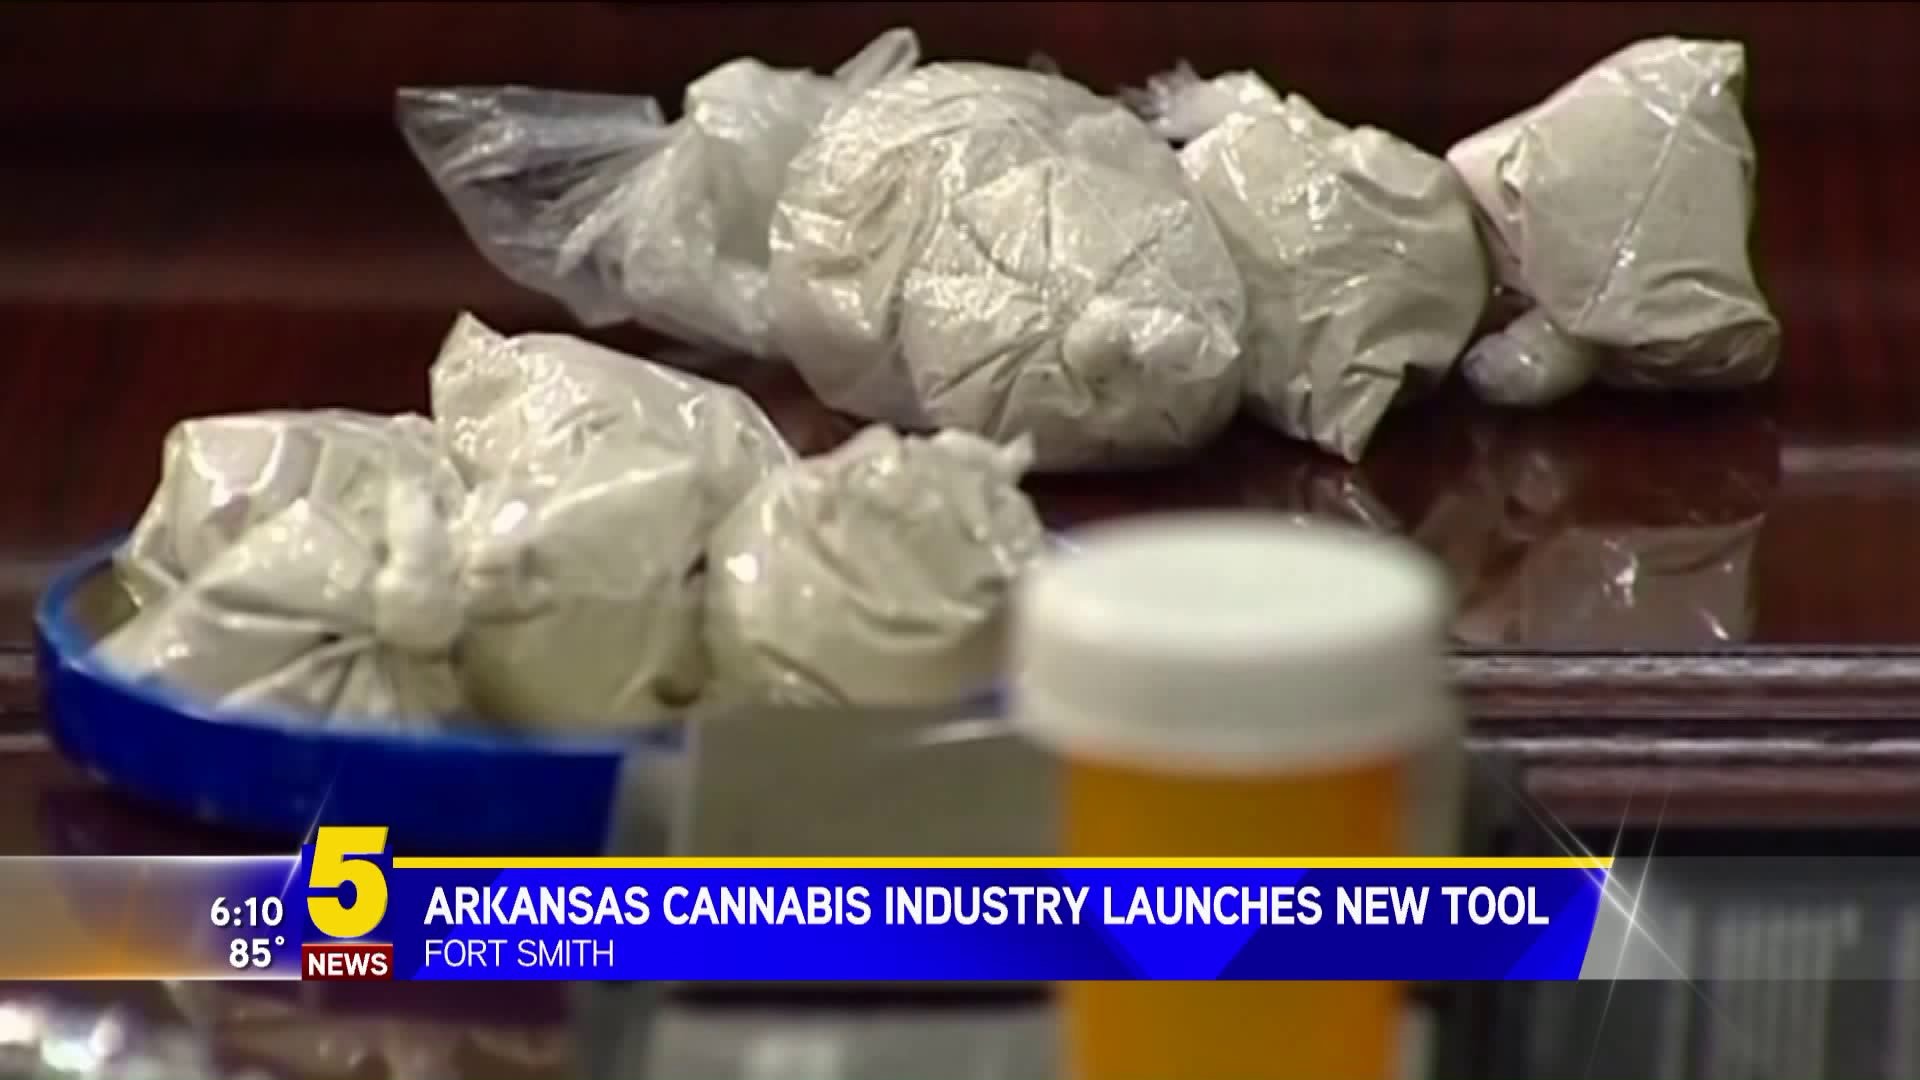 Arkansas Cannabis Industry Launches New Tool